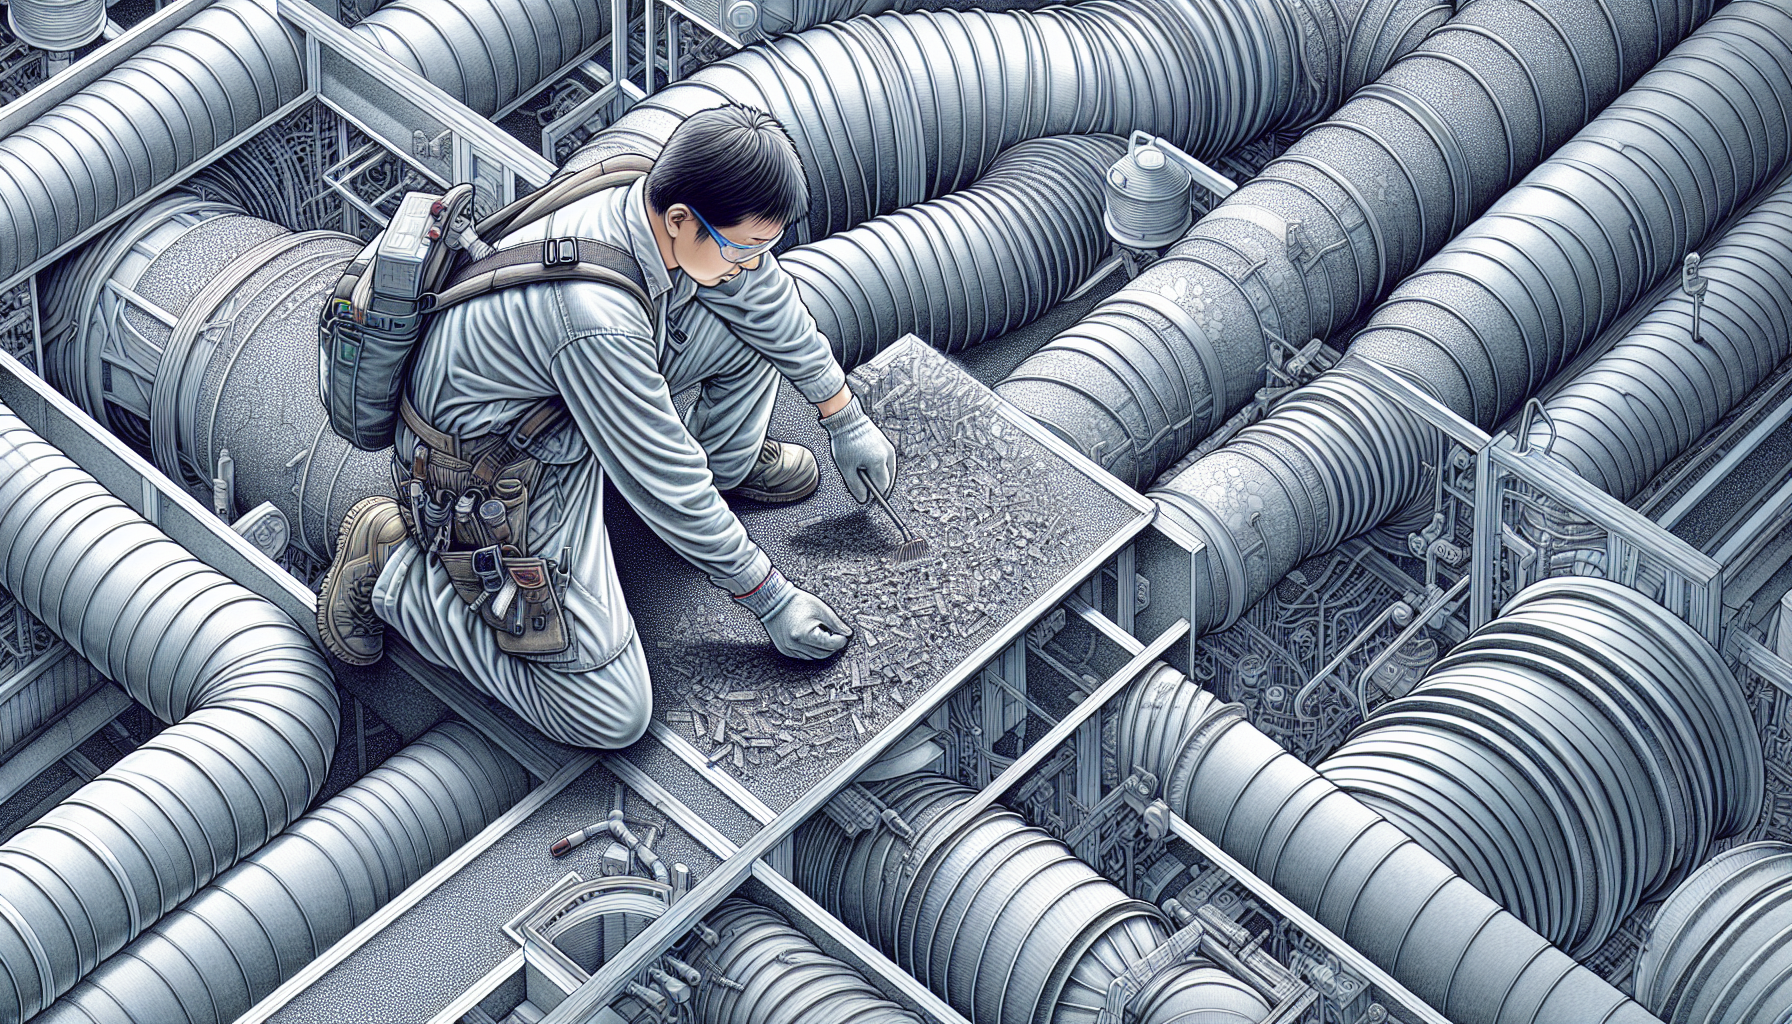 Illustration of a person conducting maintenance on a ventilation system